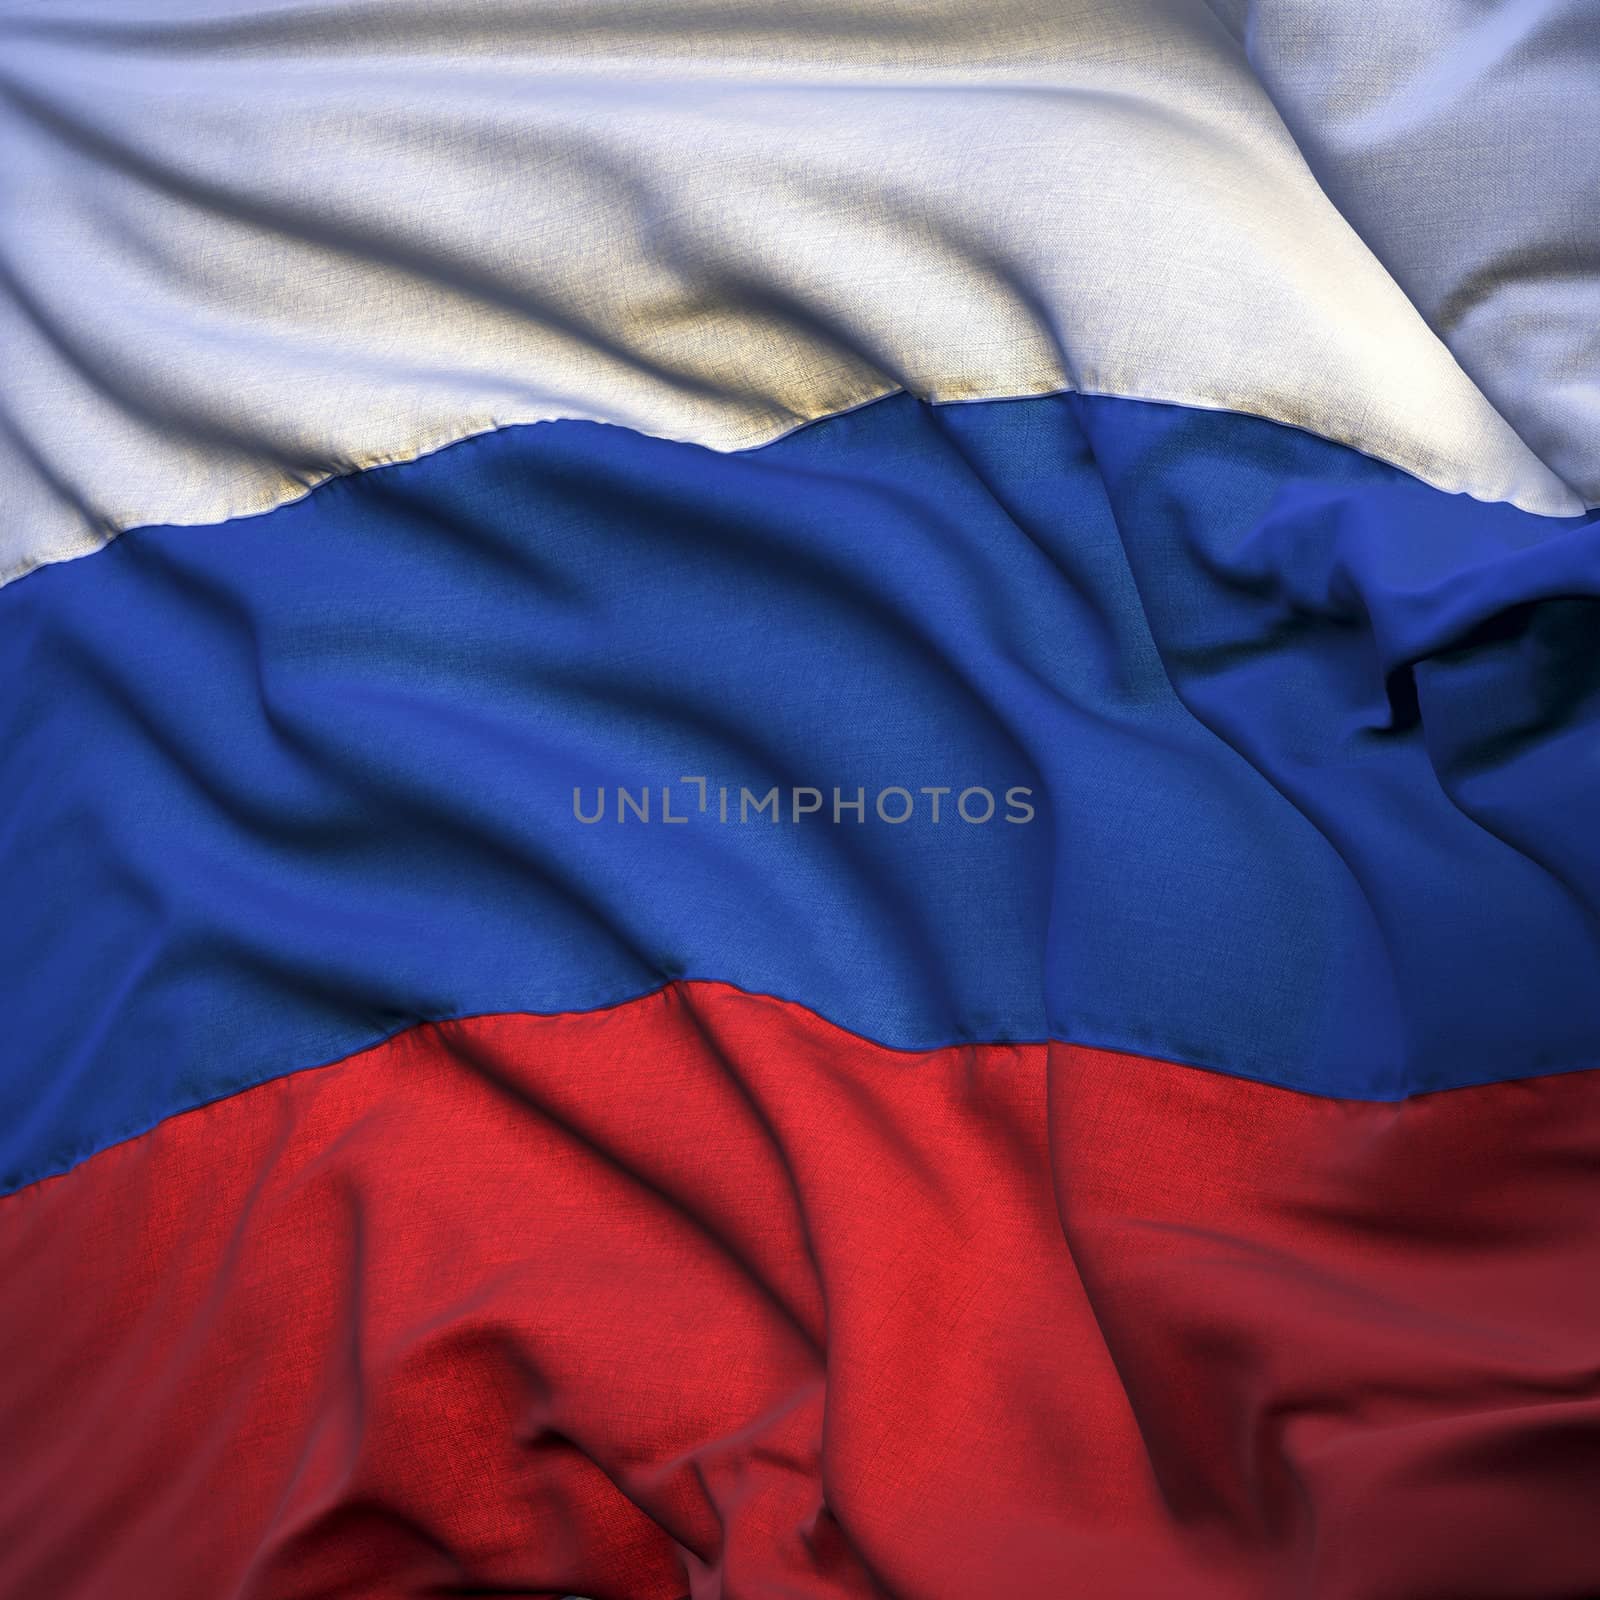 Russian flag, fluttering in the breeze, backlit rising sun. Sewn from pieces of cloth, a very realistic detailed state flag with the texture of fabric fluttering in the breeze, backlit by the rising sun light